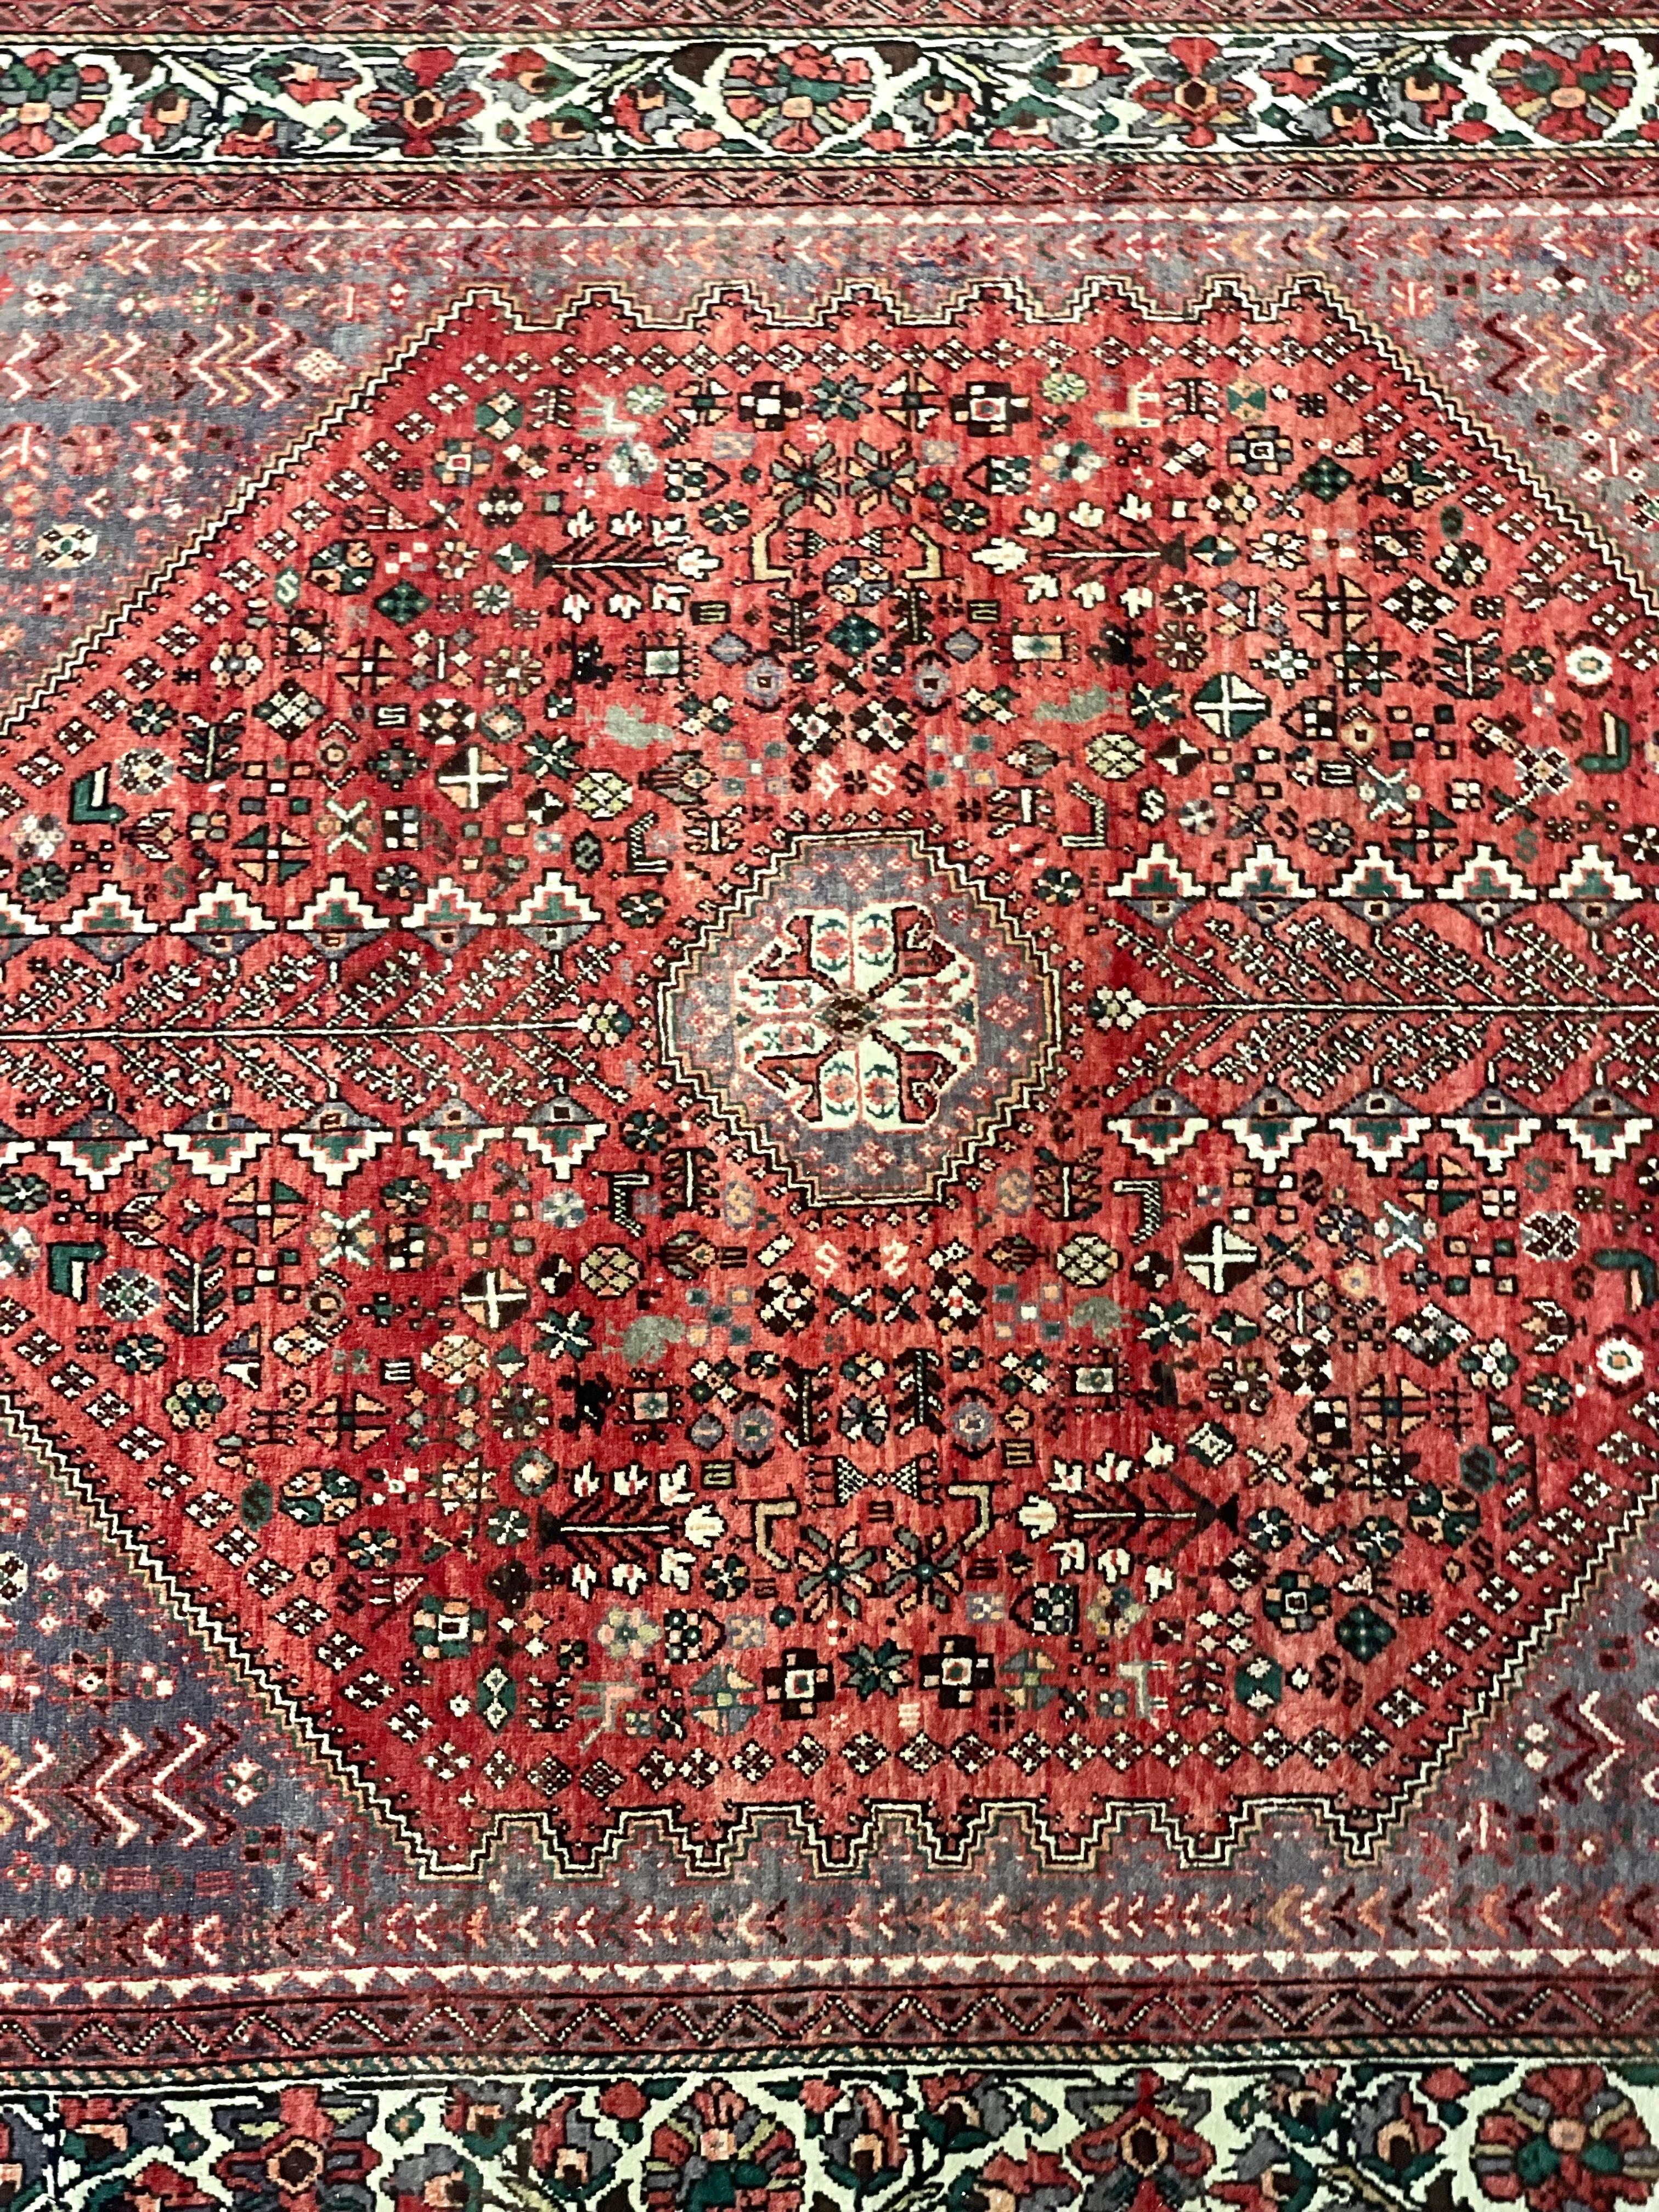 A luxurious antique Persian rug, in a medallion design woven in vivid tones of red and cream. A central diamond-shaped field contains geometric and stylised designs, while the spandrels, in more subdued hues, are accented with octagonal cream